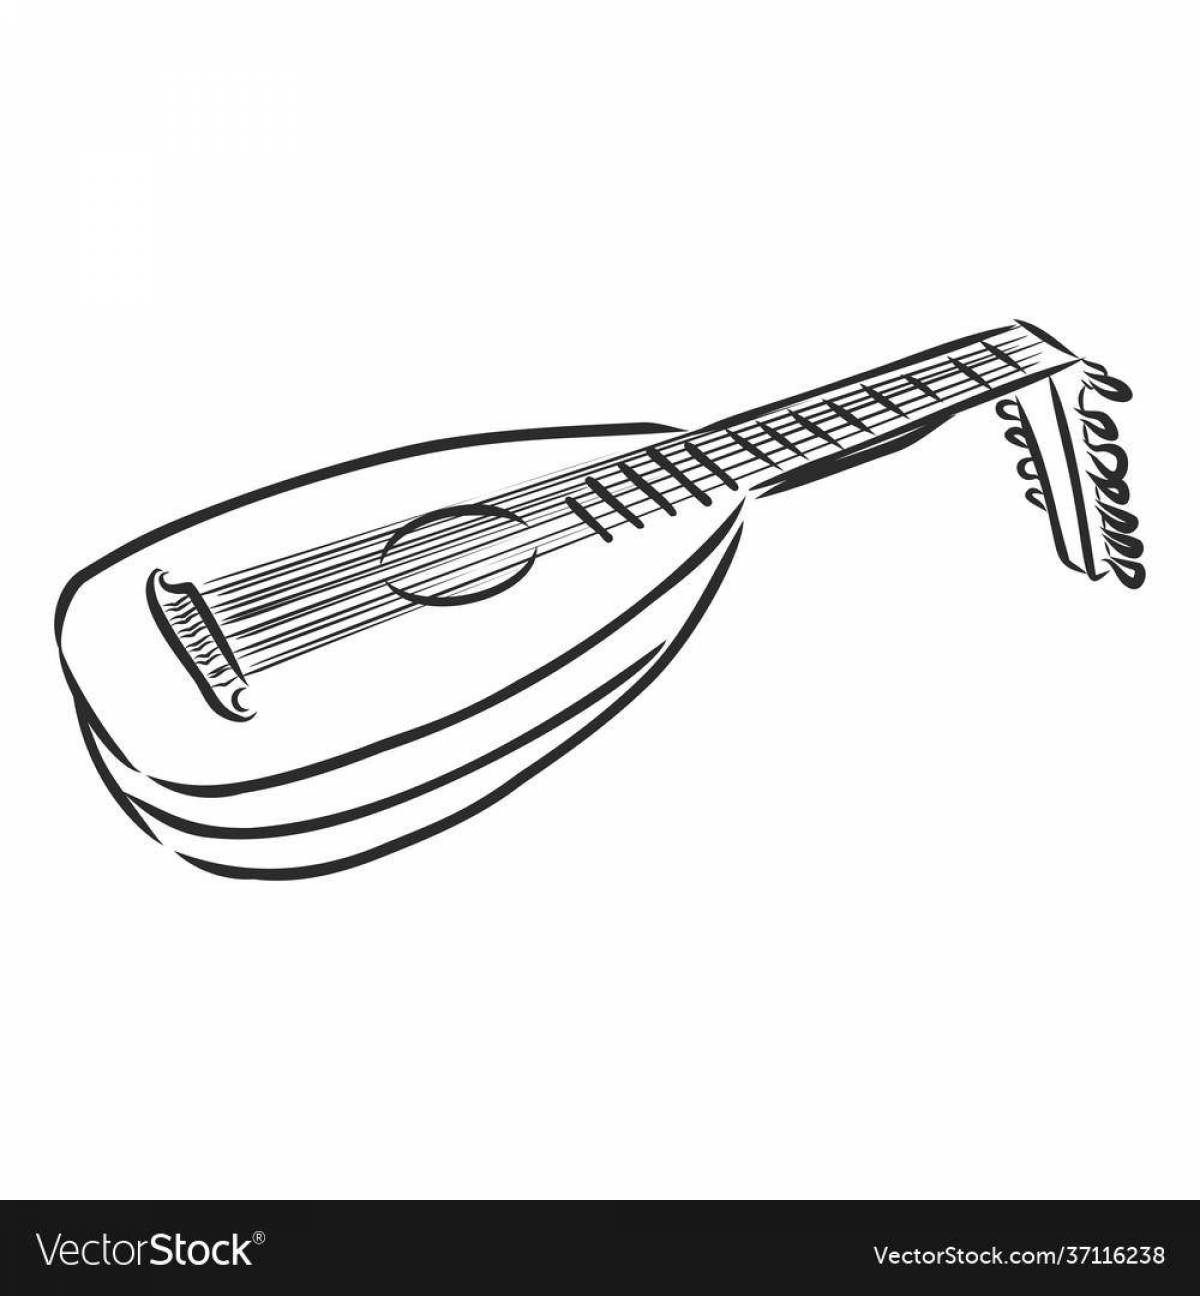 Amazing musical instrument coloring book